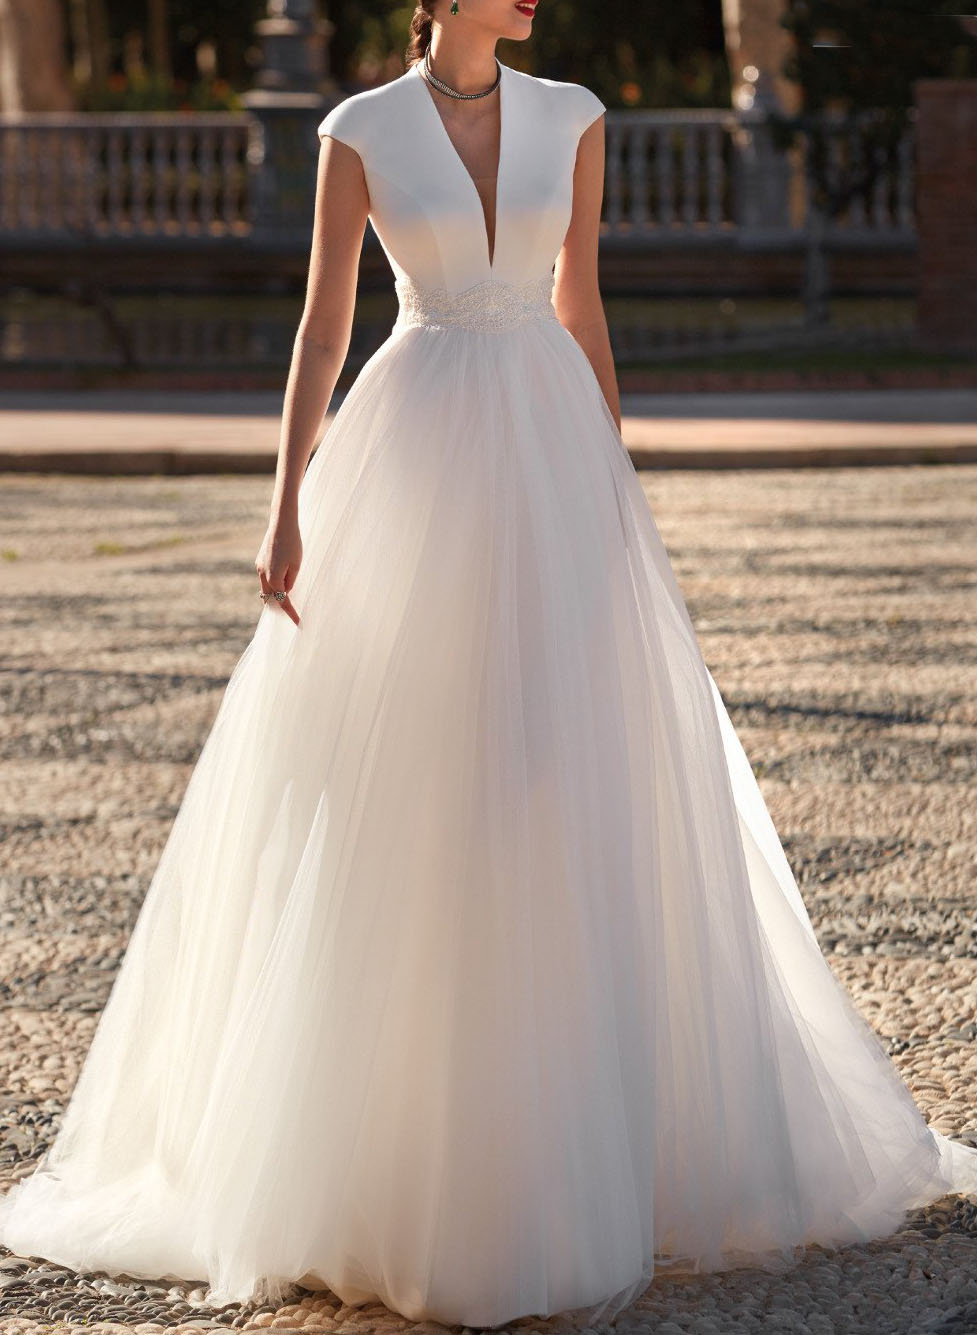 Plunge A-Line Lace Tulle Wedding Dresses With Back Hole